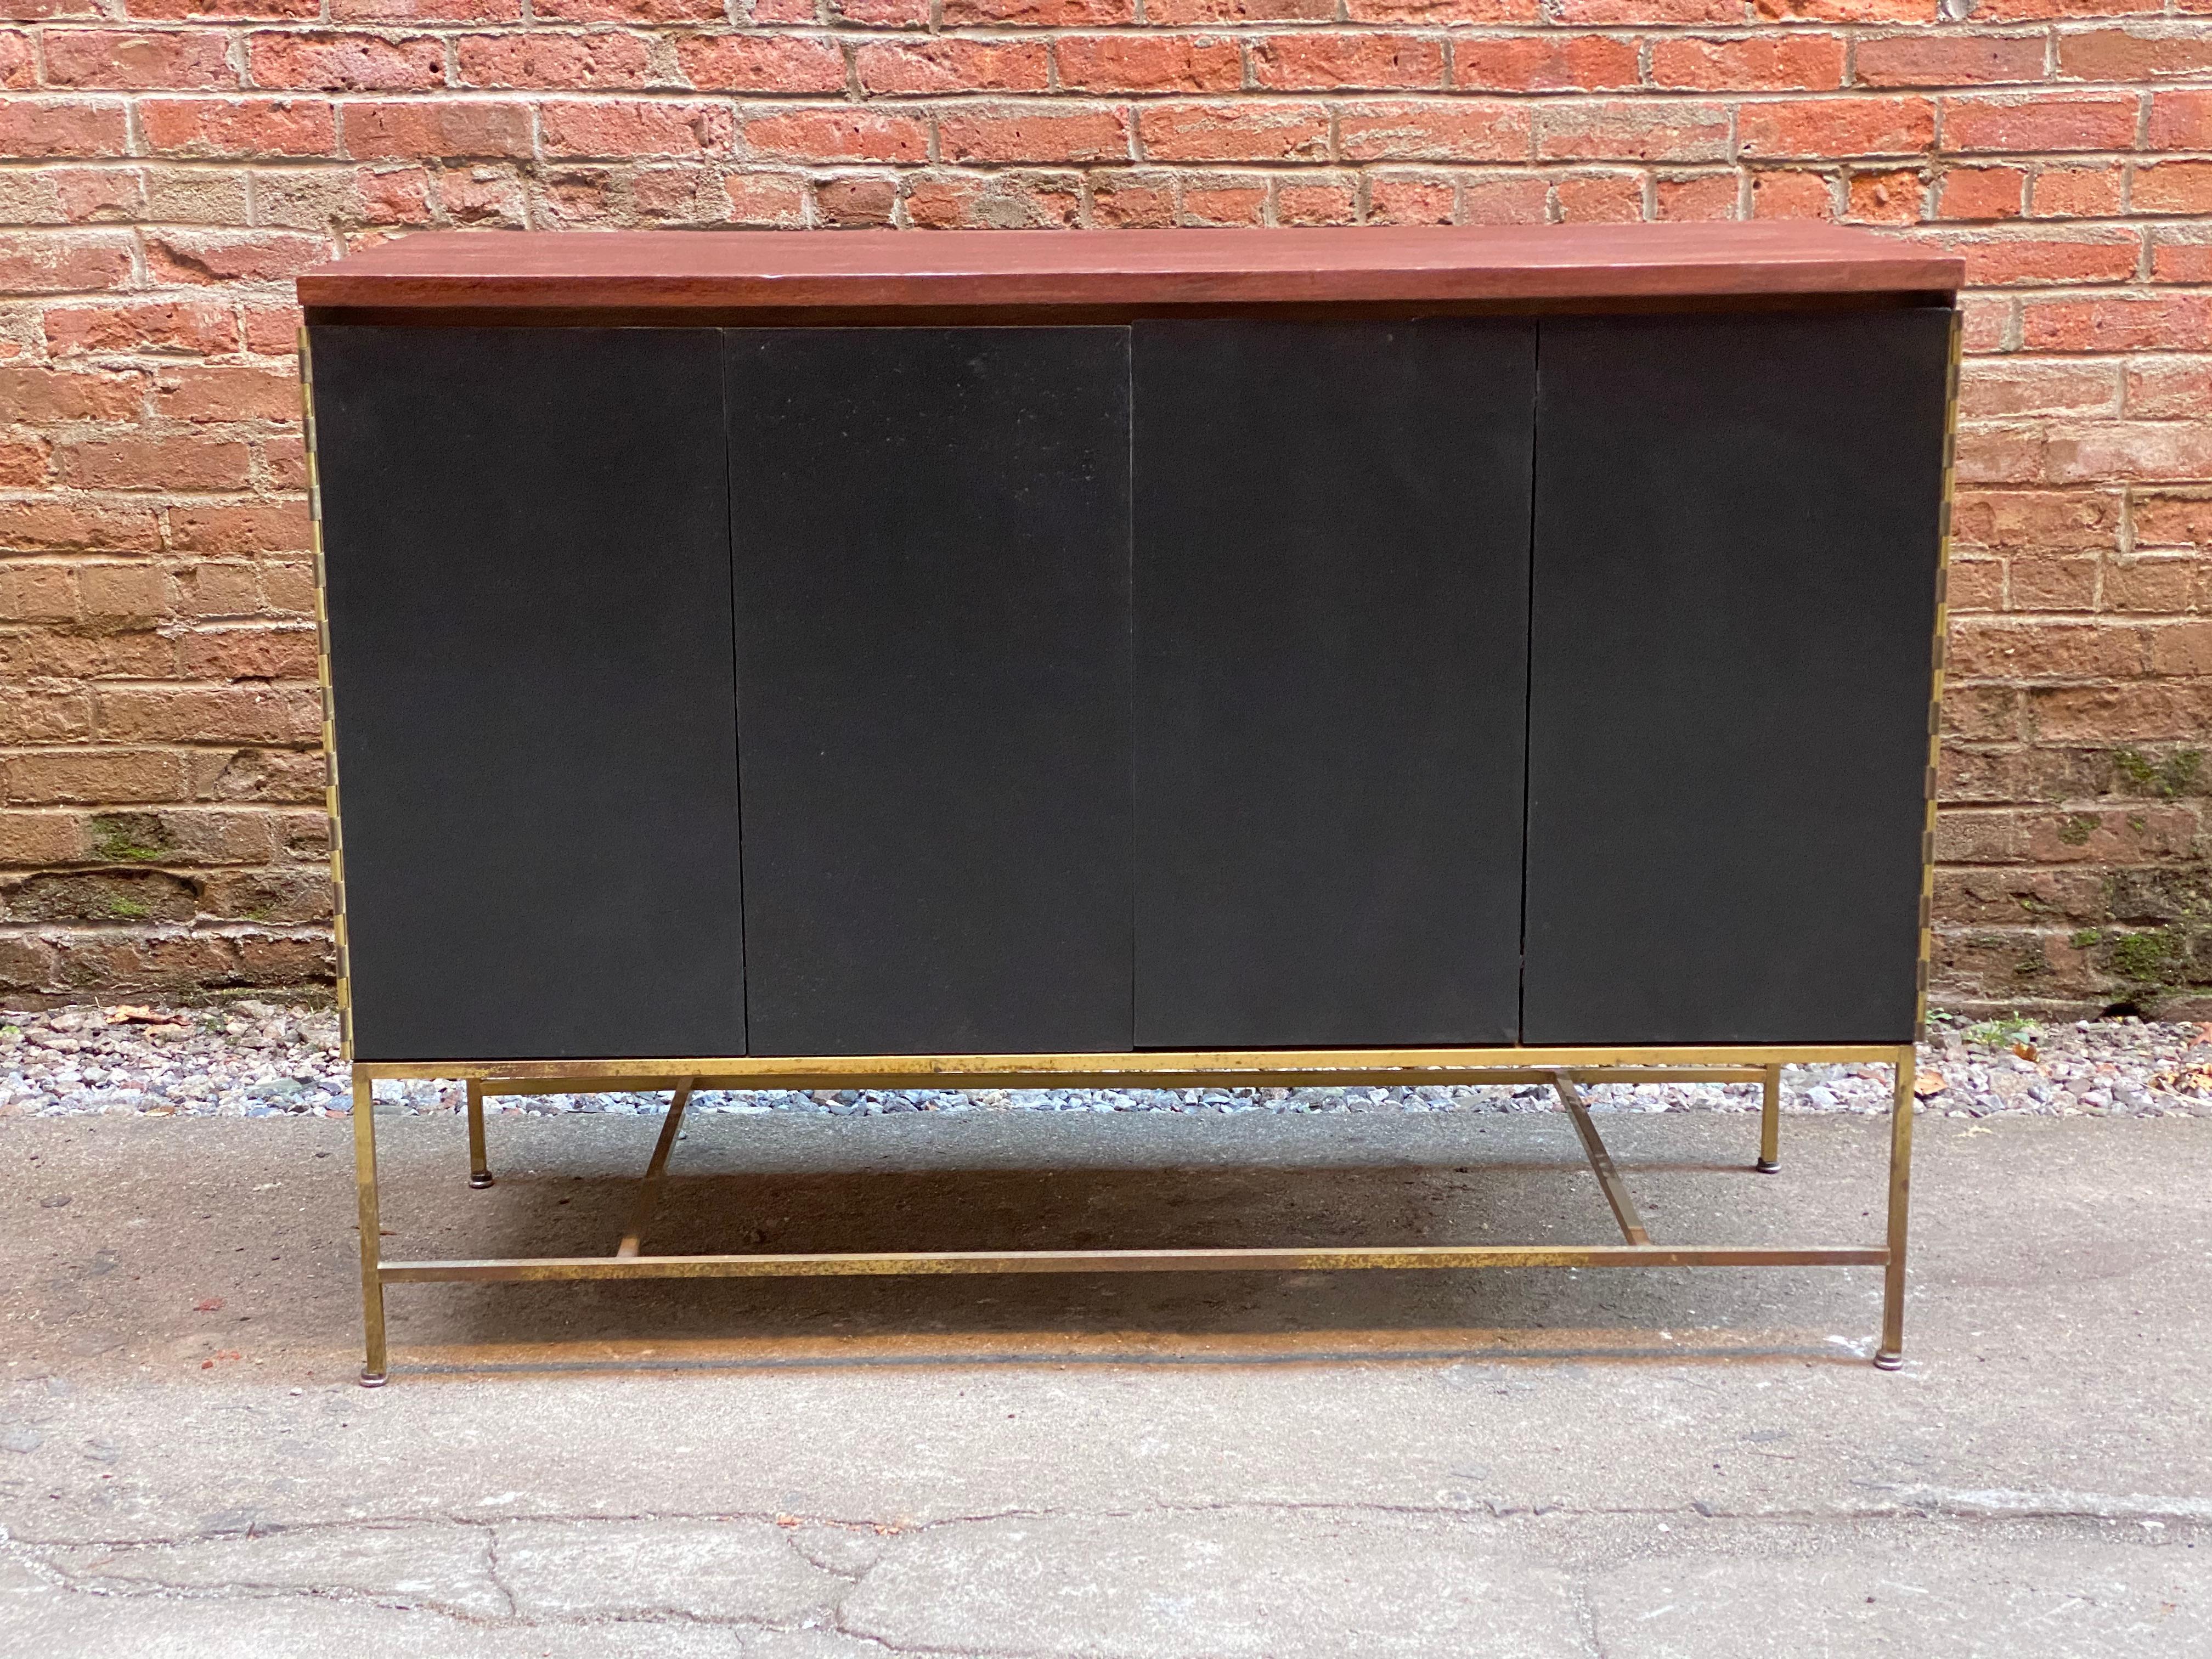 Mahogany case with ebonized doors. Four interior drawers with adjustable shelf. Signed in top drawer. Good refinished condition with wear commensurate with age and use. Some minor cracks to the feet on metal base (see photo).

Approximately 19.25